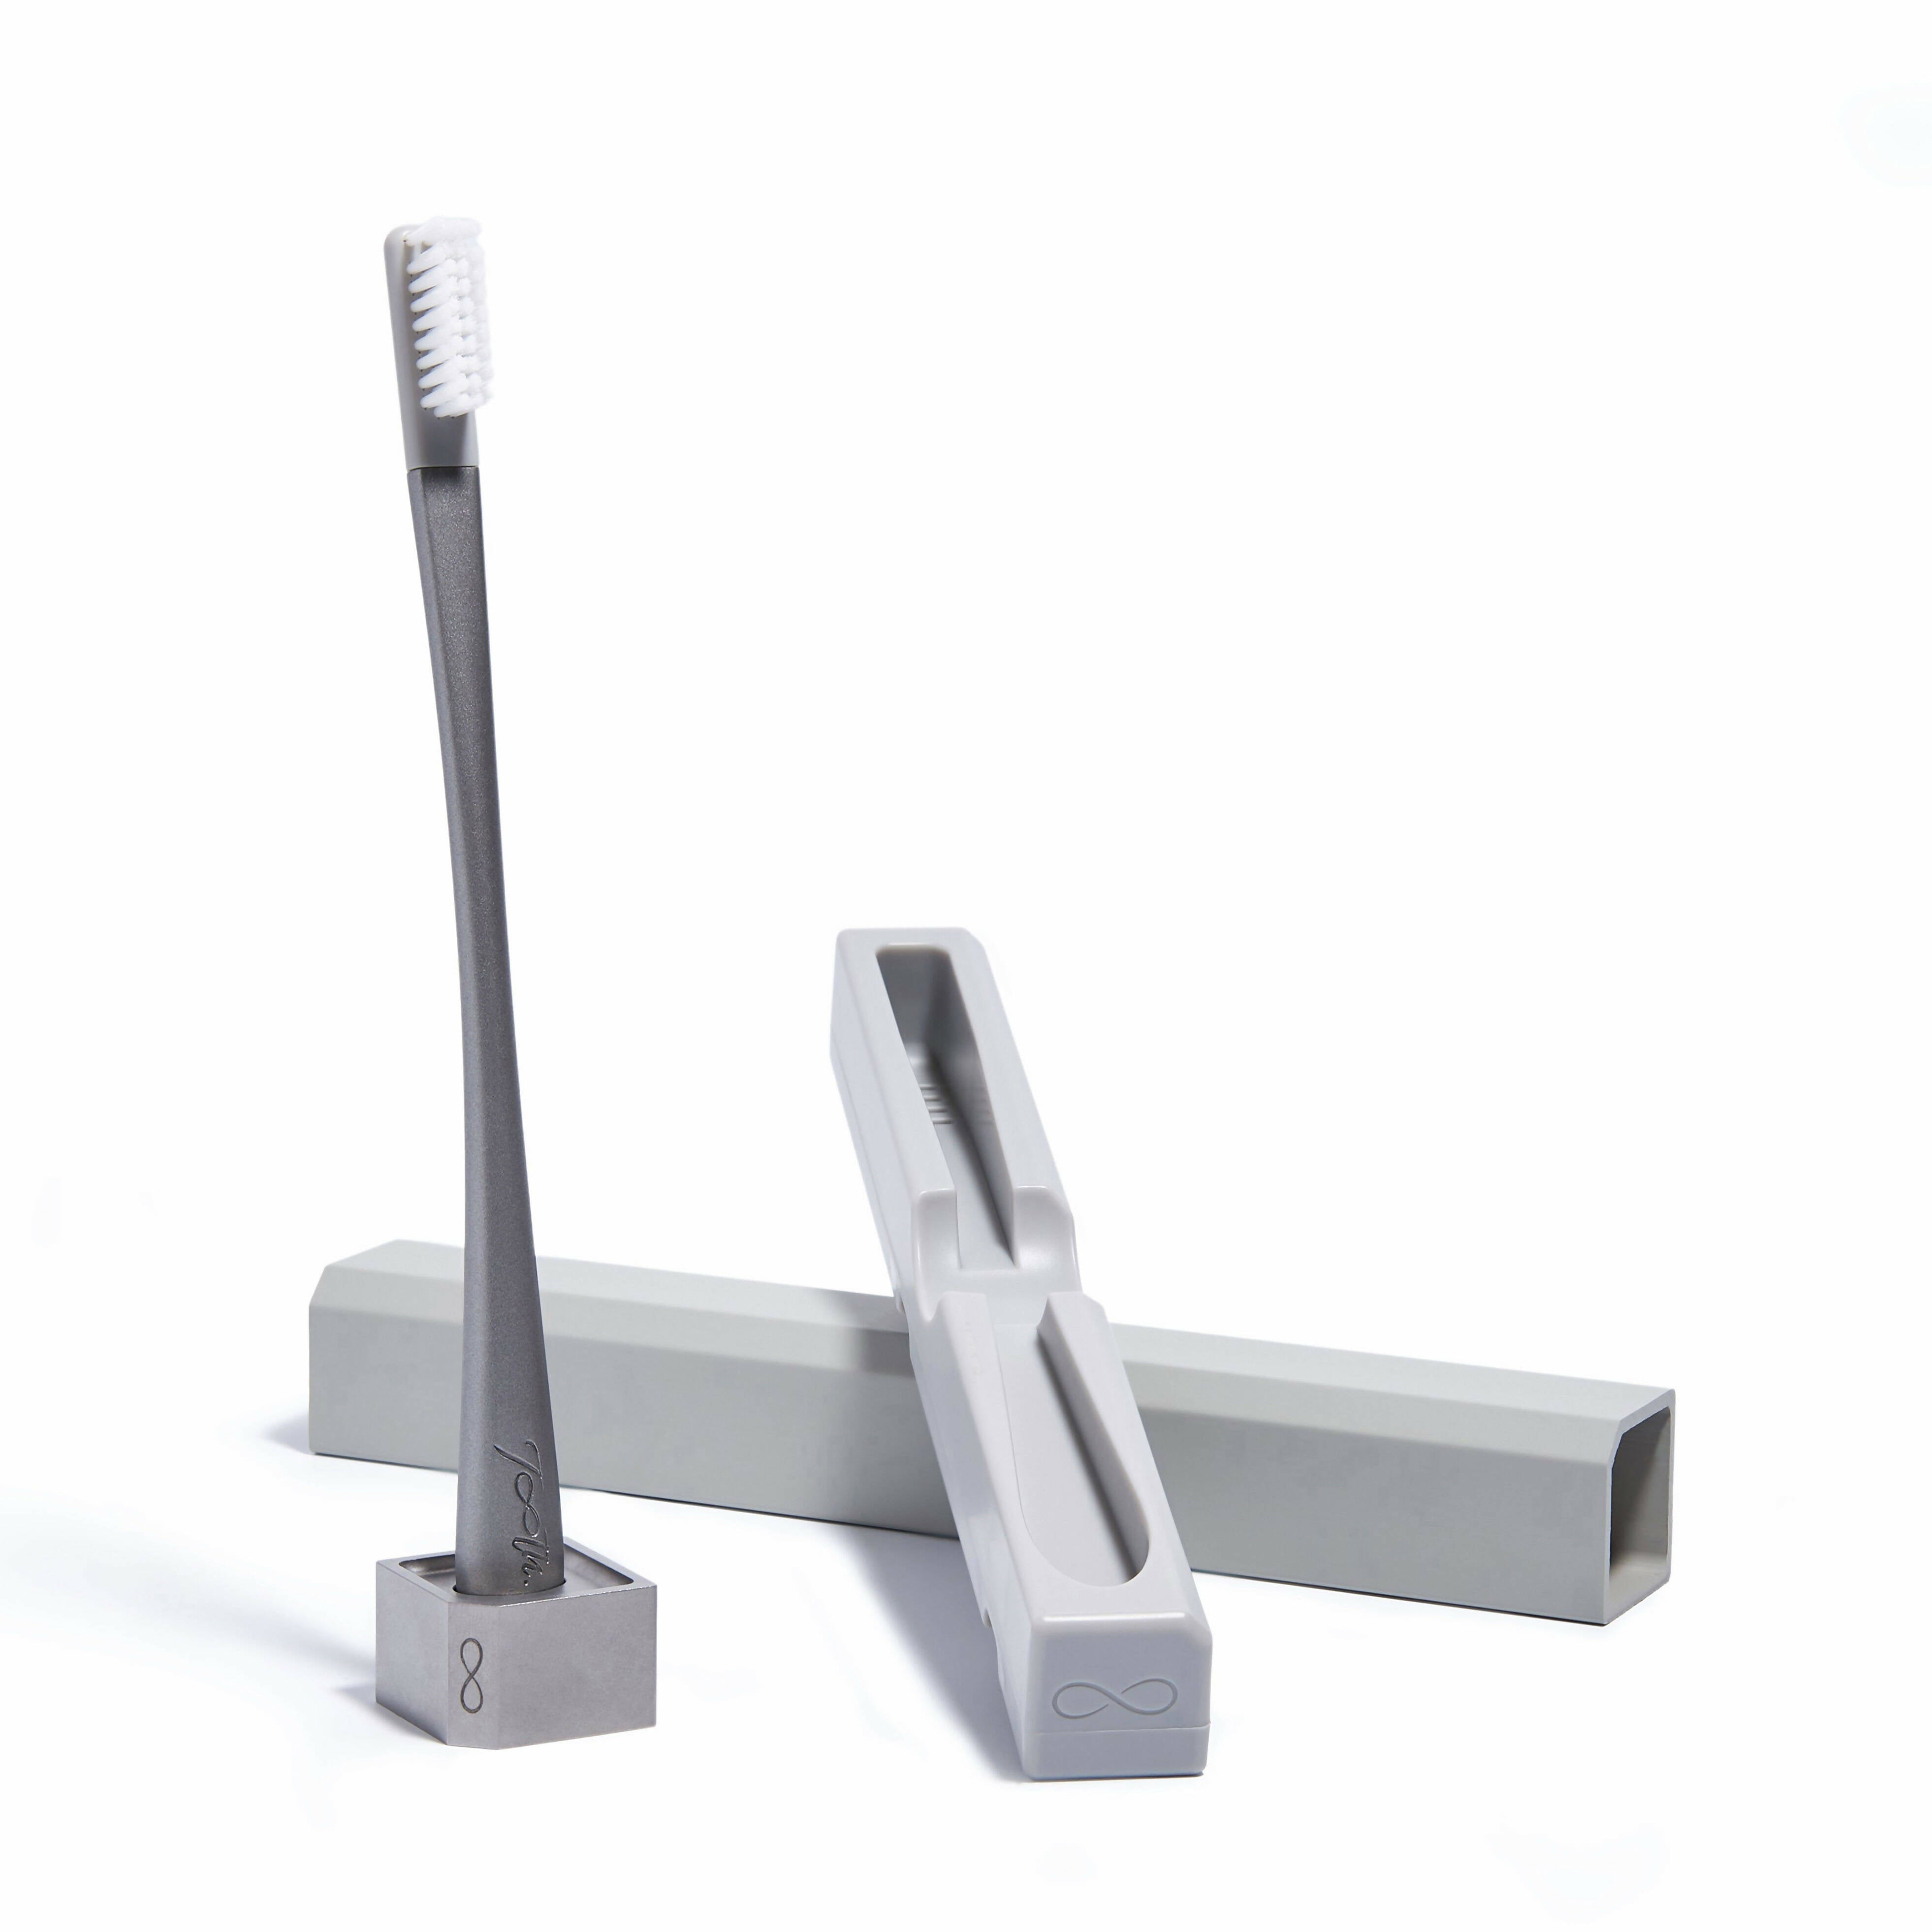 Tooth.Travel - Toothbrush, Case & Stand